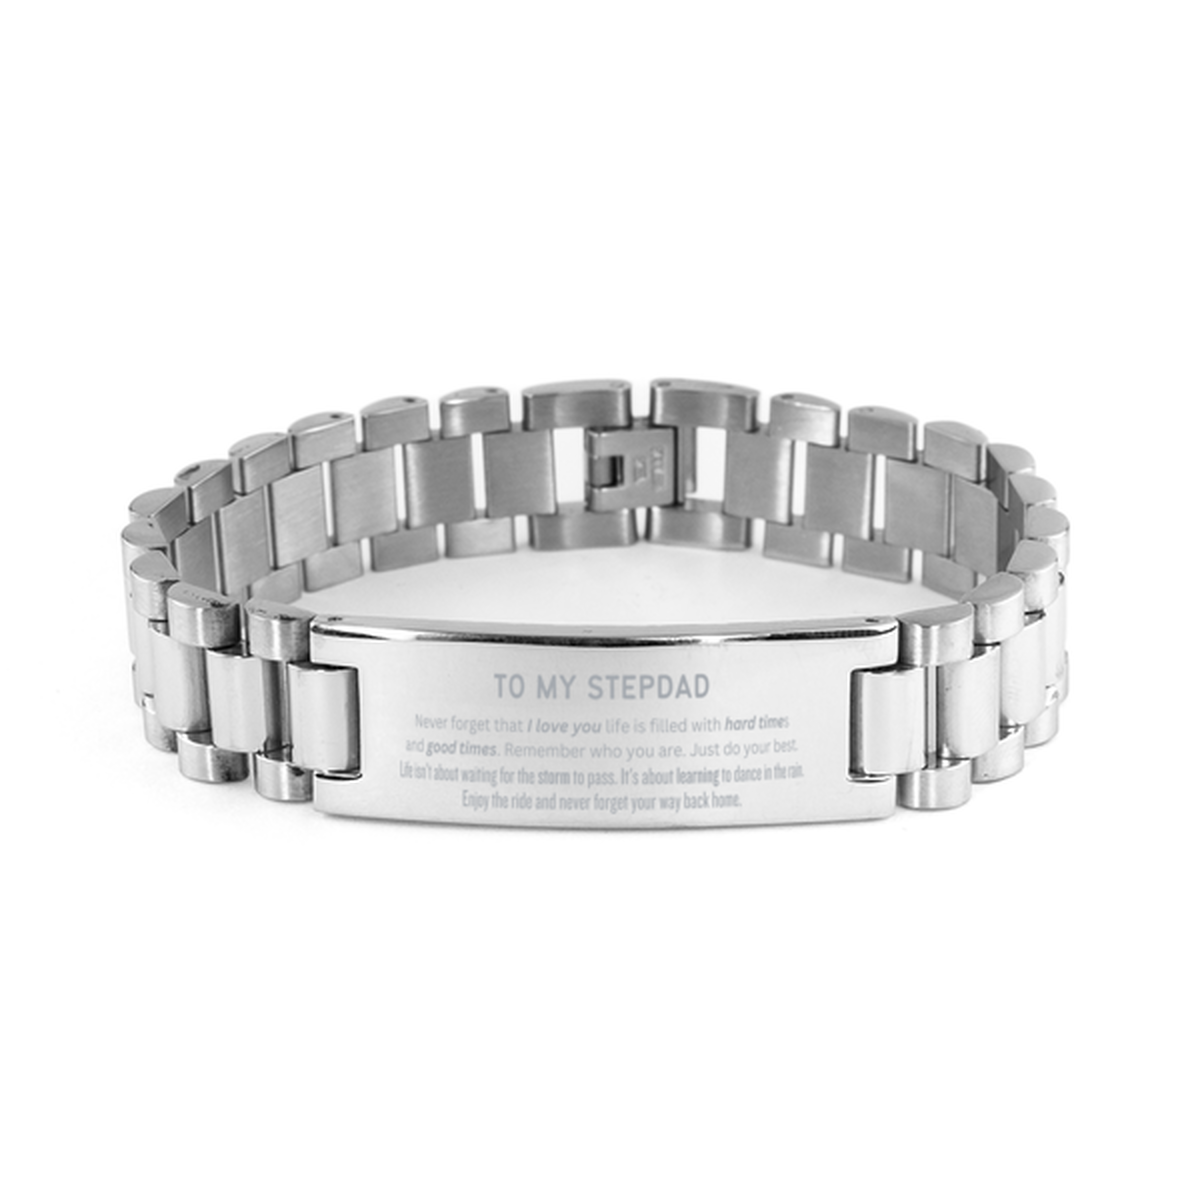 Christmas Stepdad Ladder Stainless Steel Bracelet Gifts, To My Stepdad Birthday Thank You Gifts For Stepdad, Graduation Unique Gifts For Stepdad To My Stepdad Never forget that I love you life is filled with hard times and good times. Remember who you are